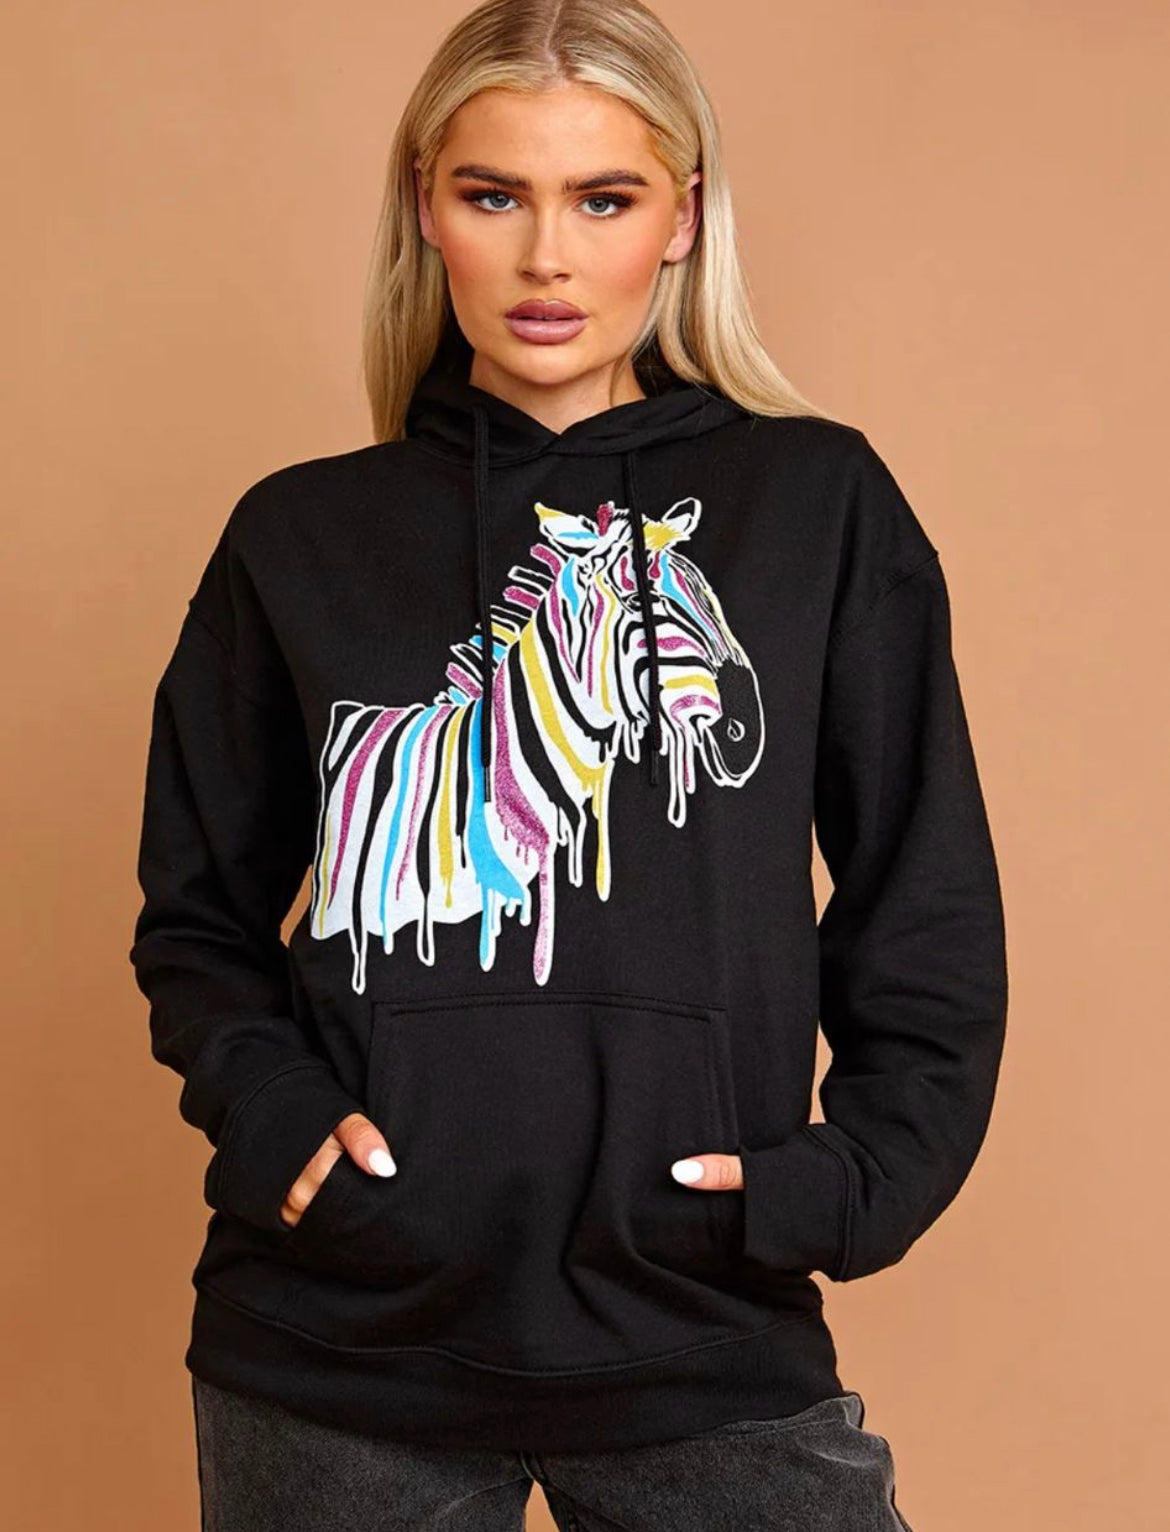 Zebra Hoody online only  (3colours)